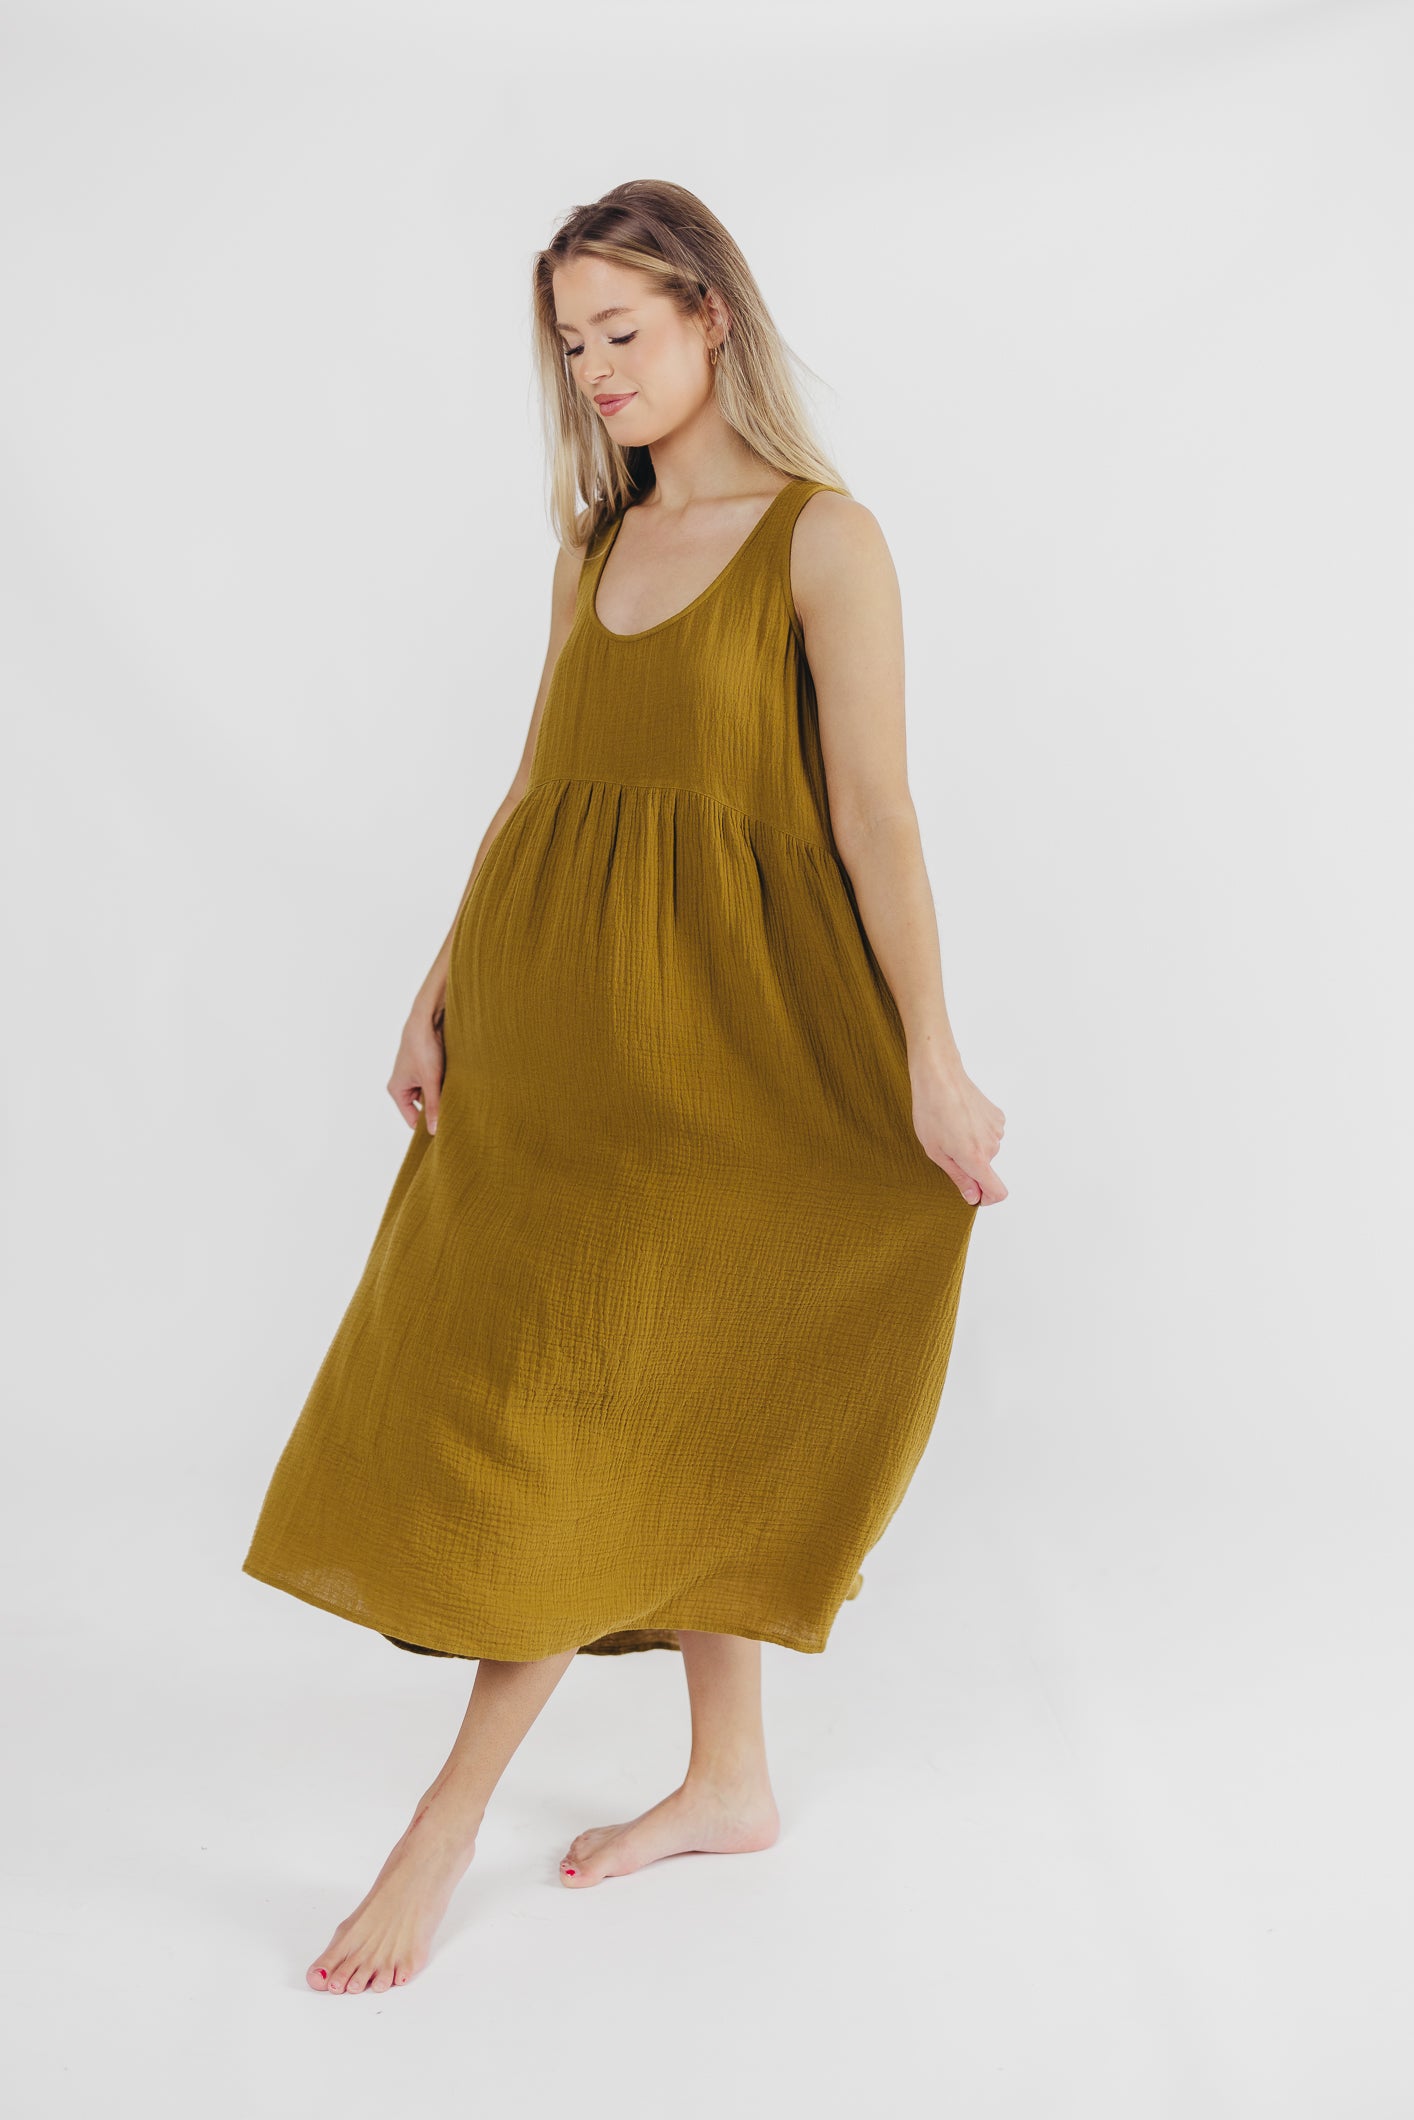 Brianna High-Low Gauze Maxi Dress in Brown Olive